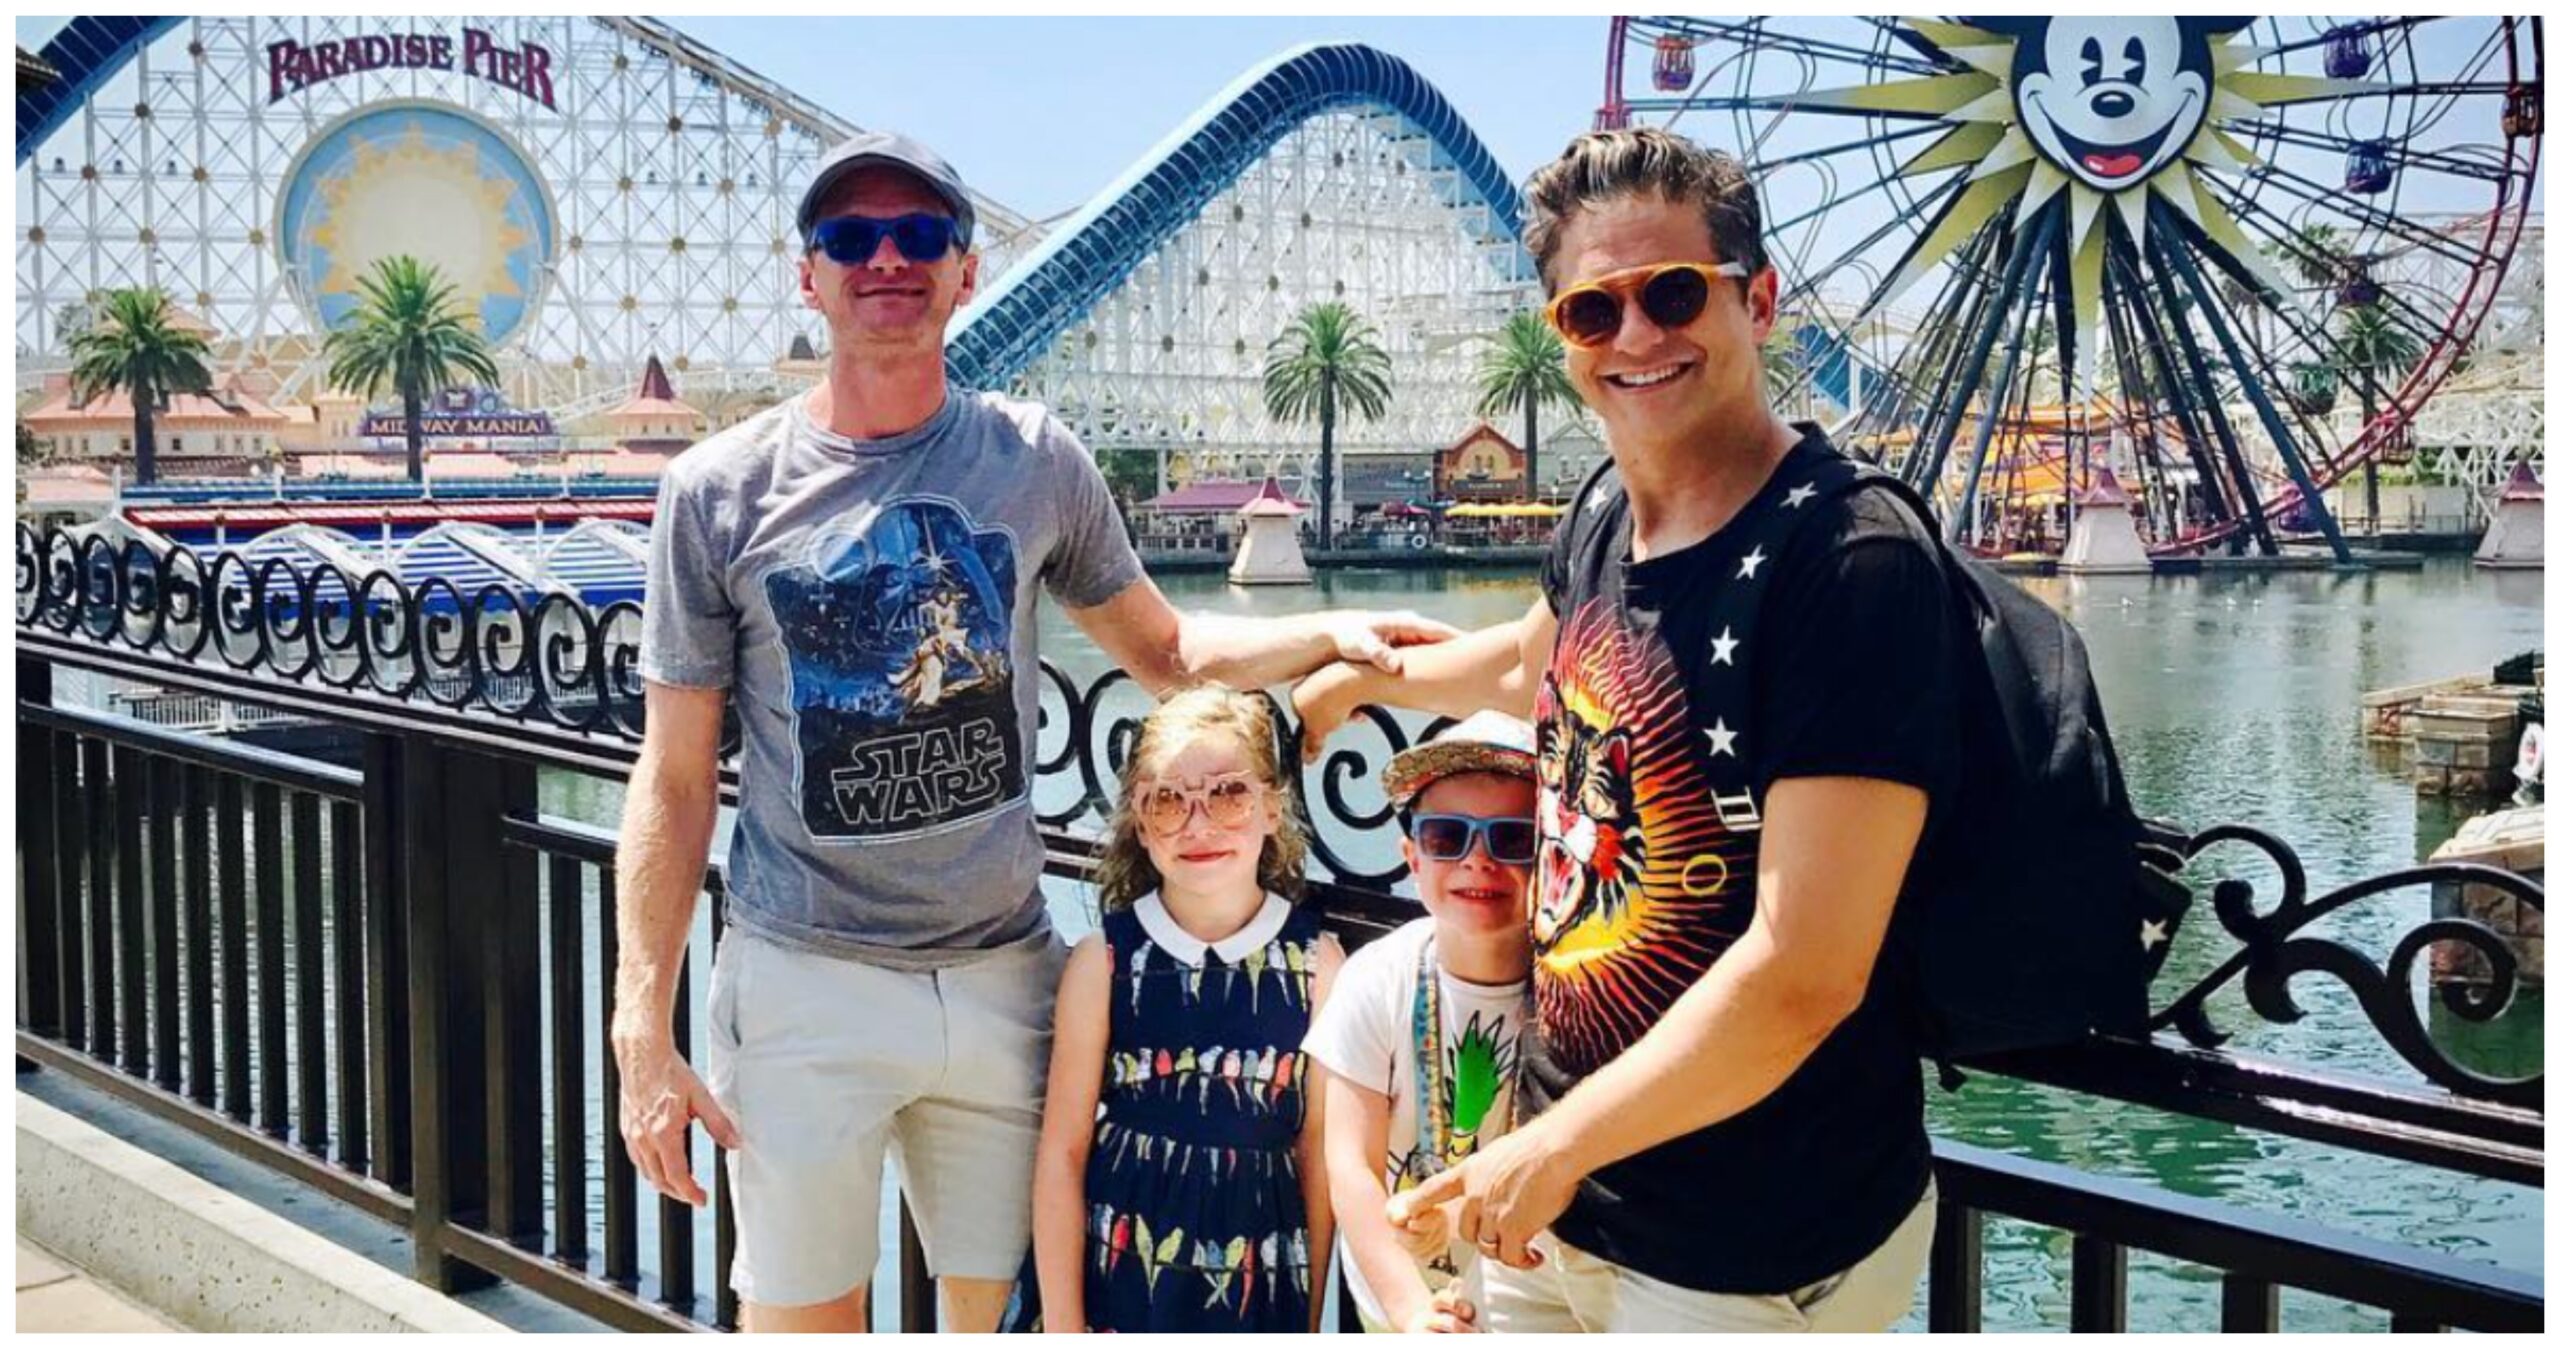 Neil Patrick Harris Says He'll Visit the Disney Parks with his Kids "Until They Can't Stand Him Anymore"